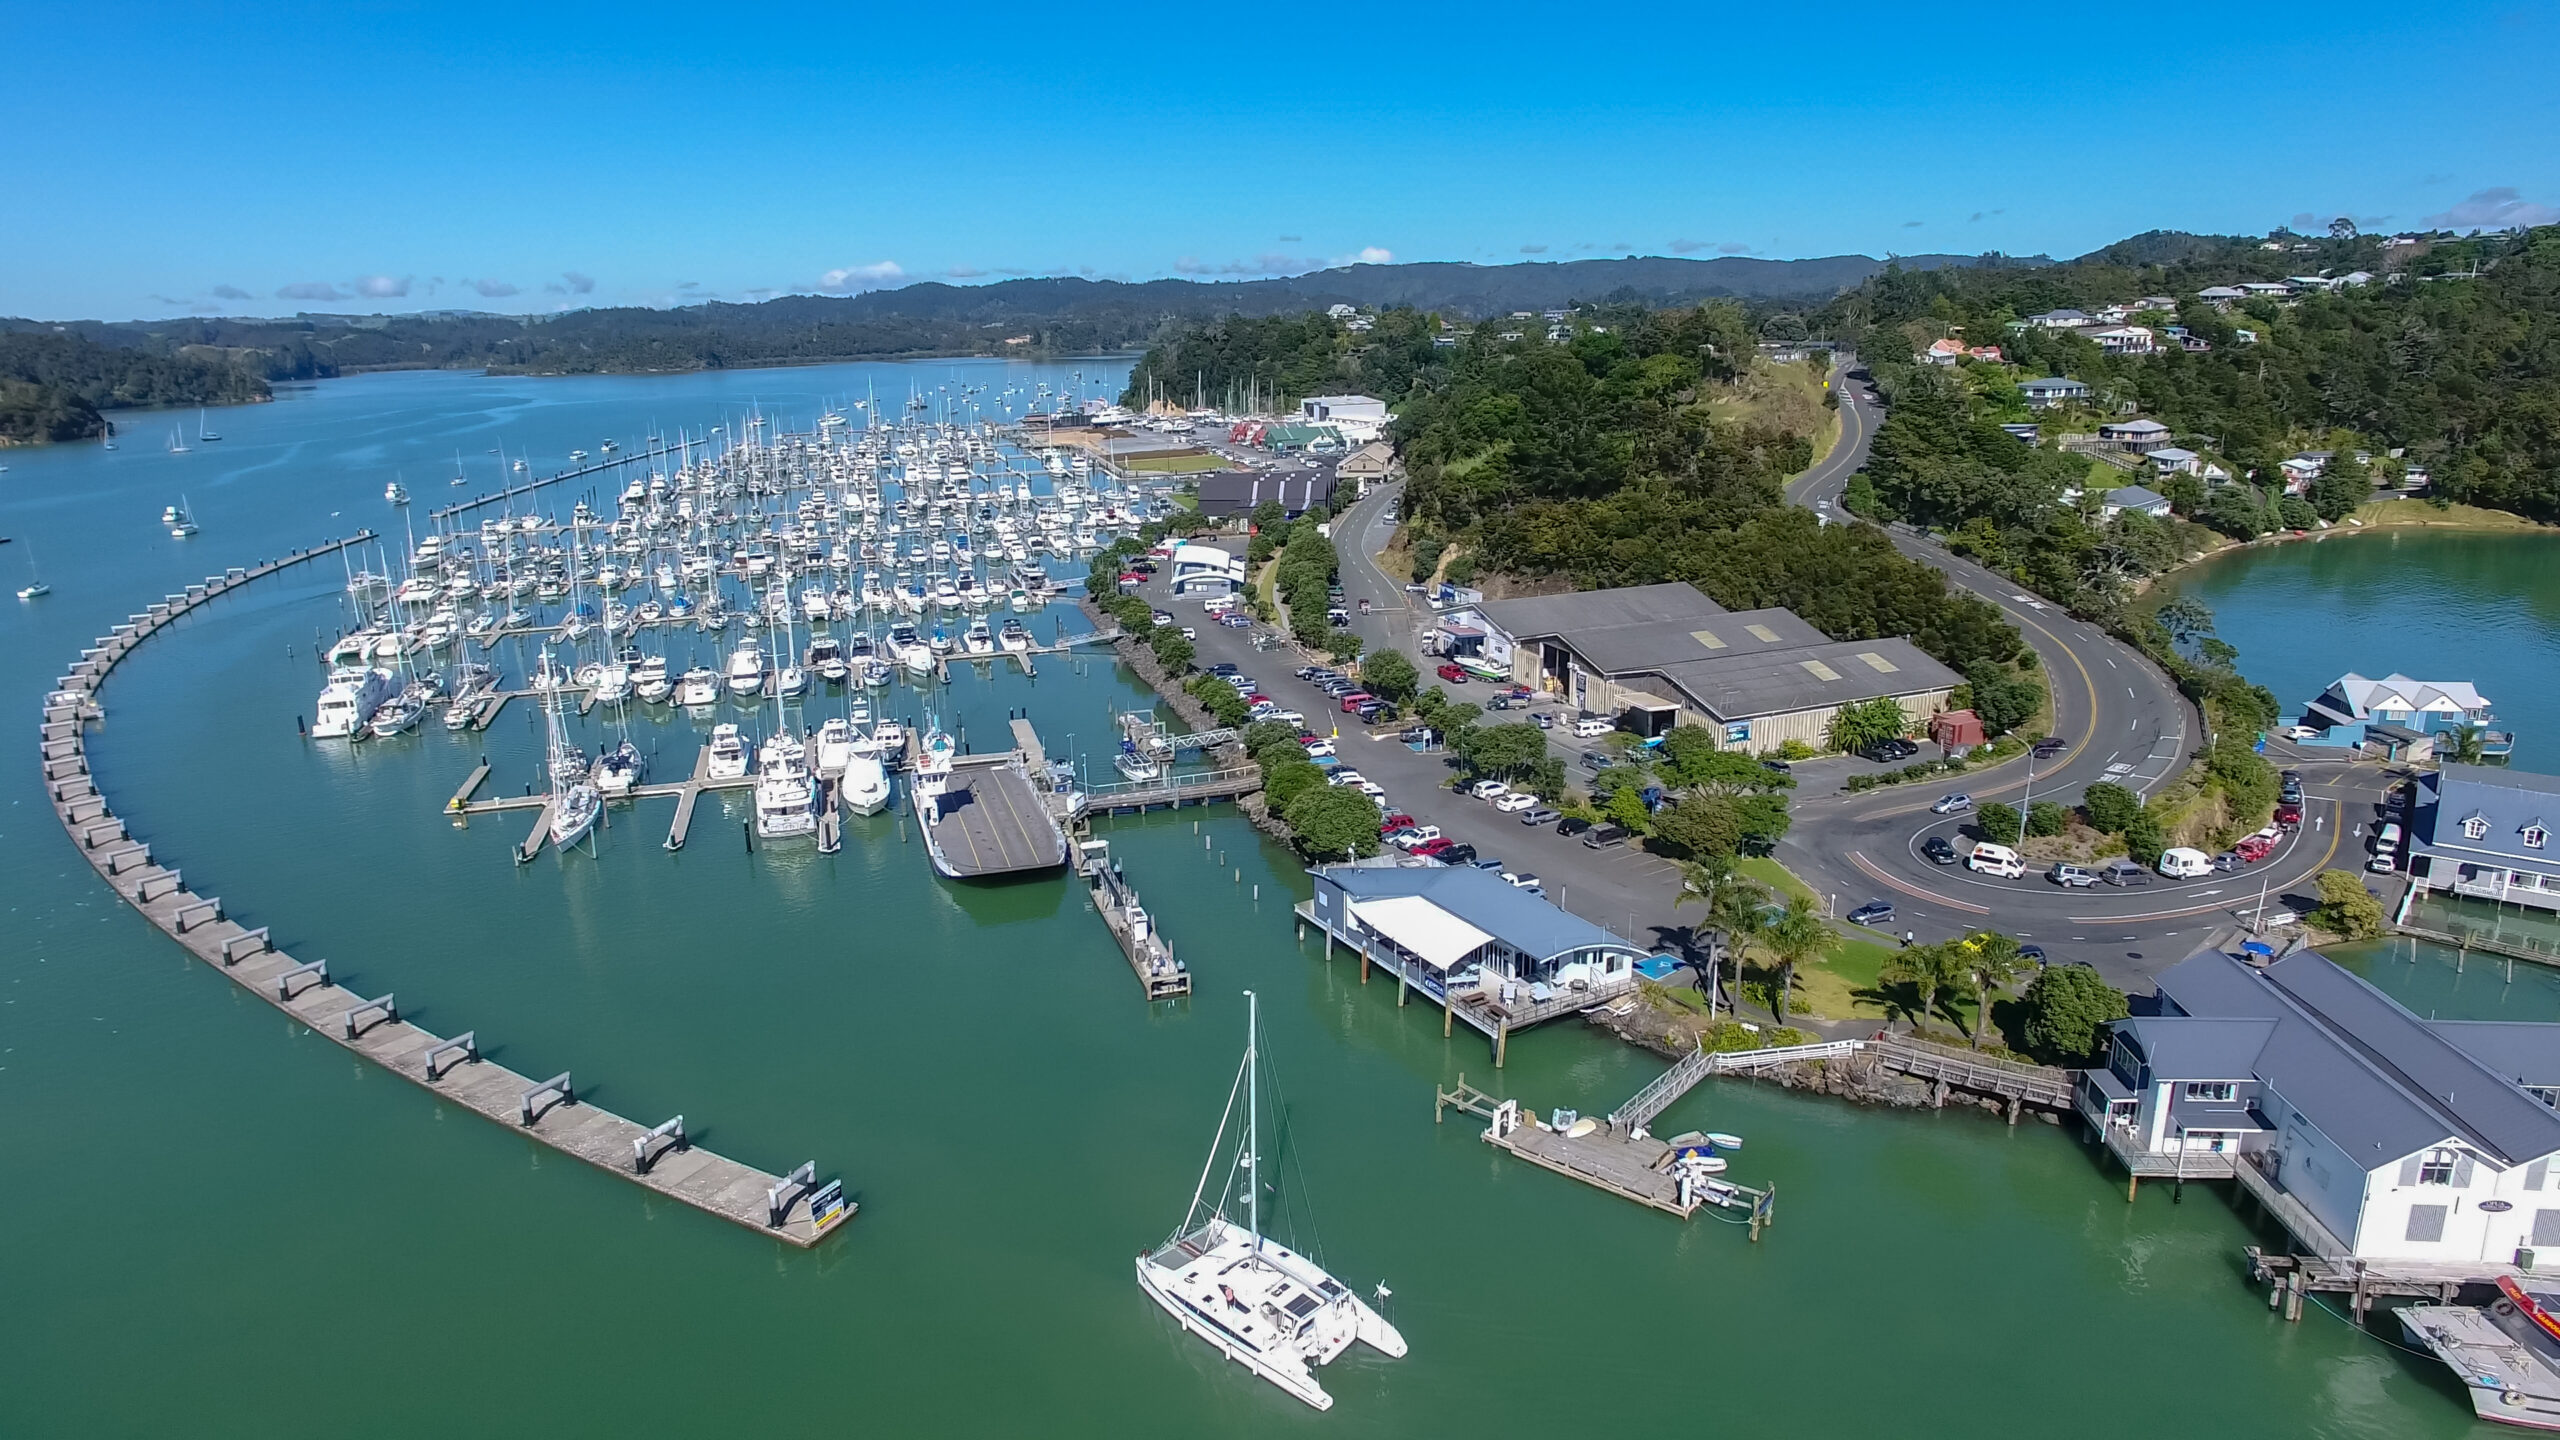 Explore how Bay of Islands Marina's shift to PacsoftNG's software transformed it into New Zealand's premier marina, winning global acclaim.